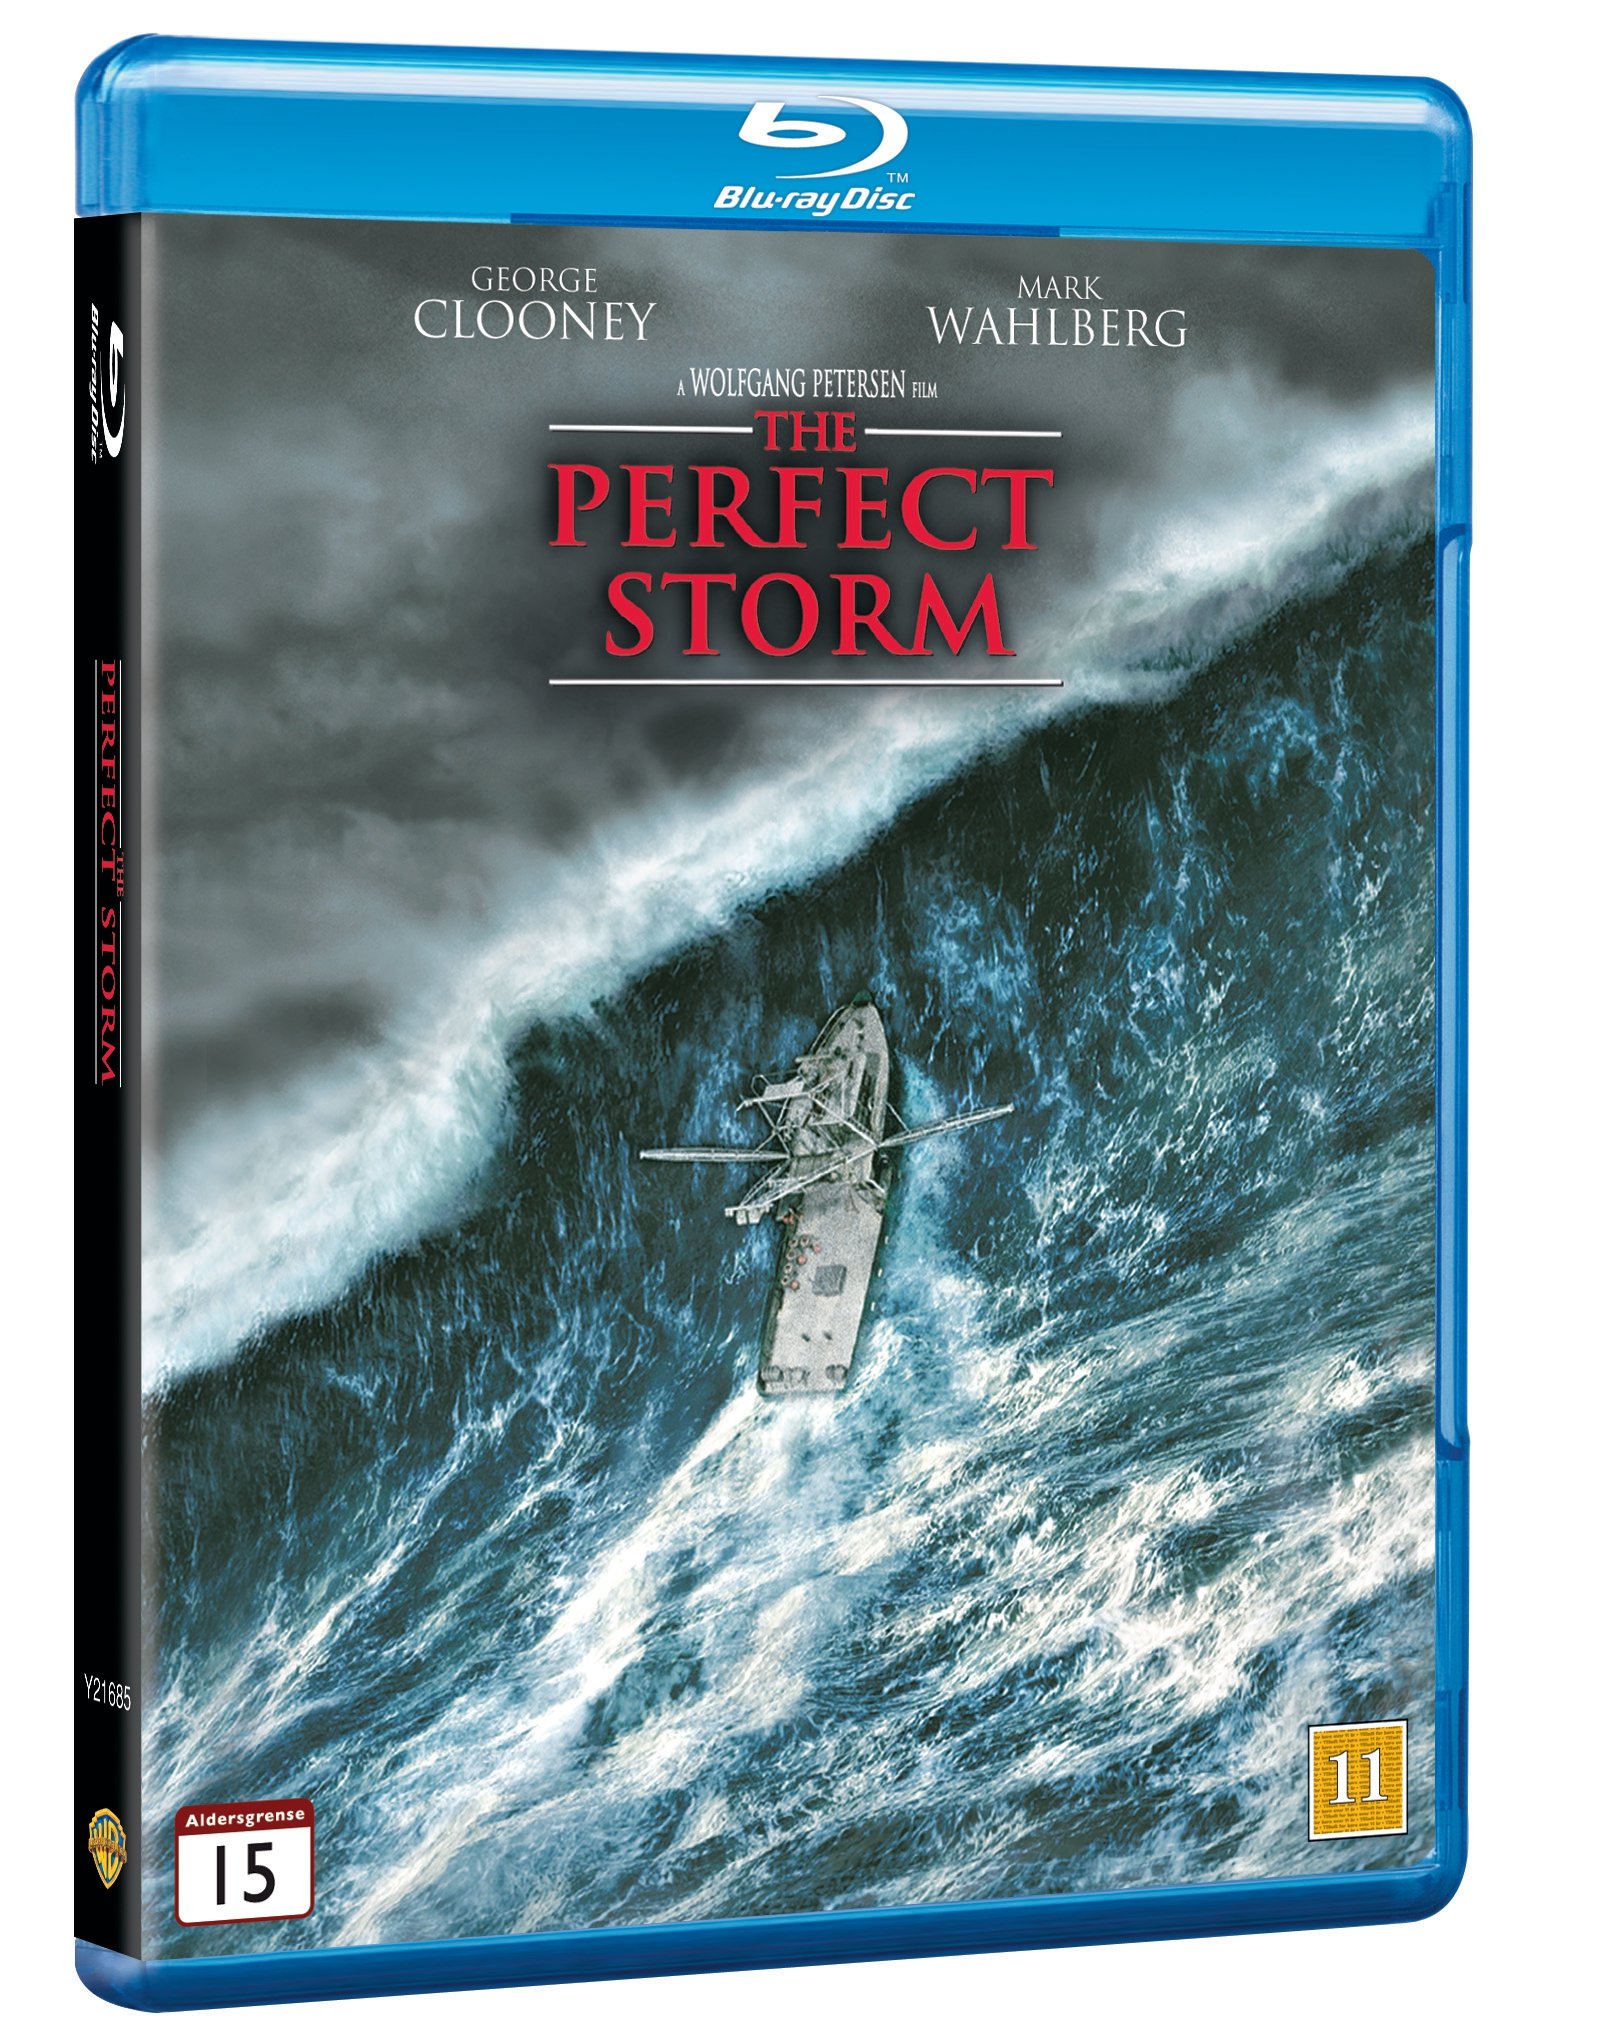 The perfect storm - Blu ray